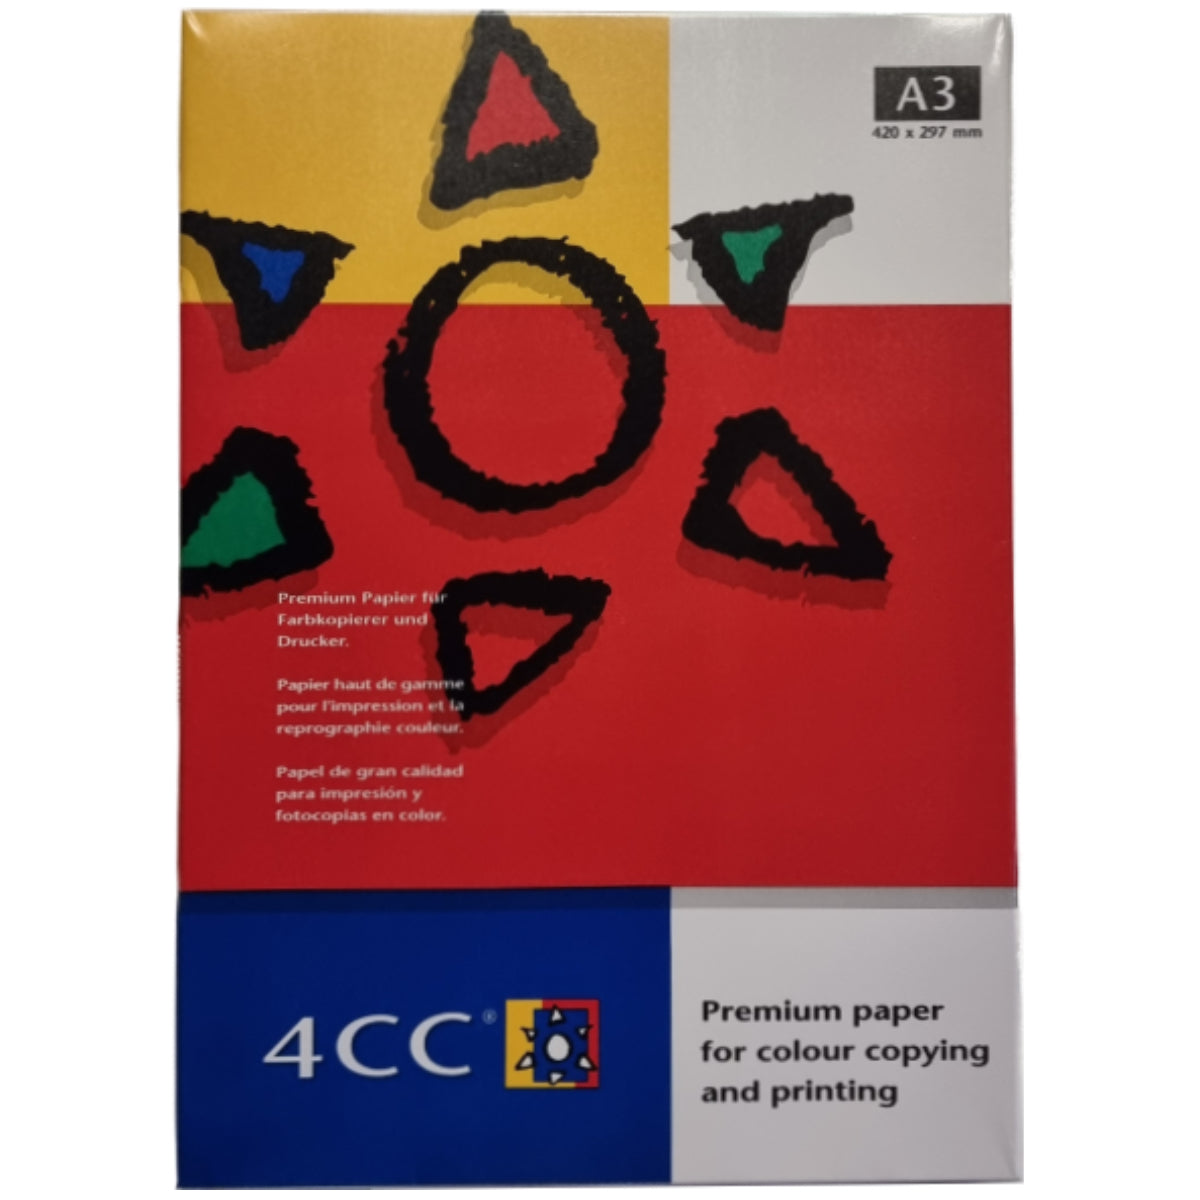 4CC Premium Paper A3, 200gsm, 250sheets/pack, White